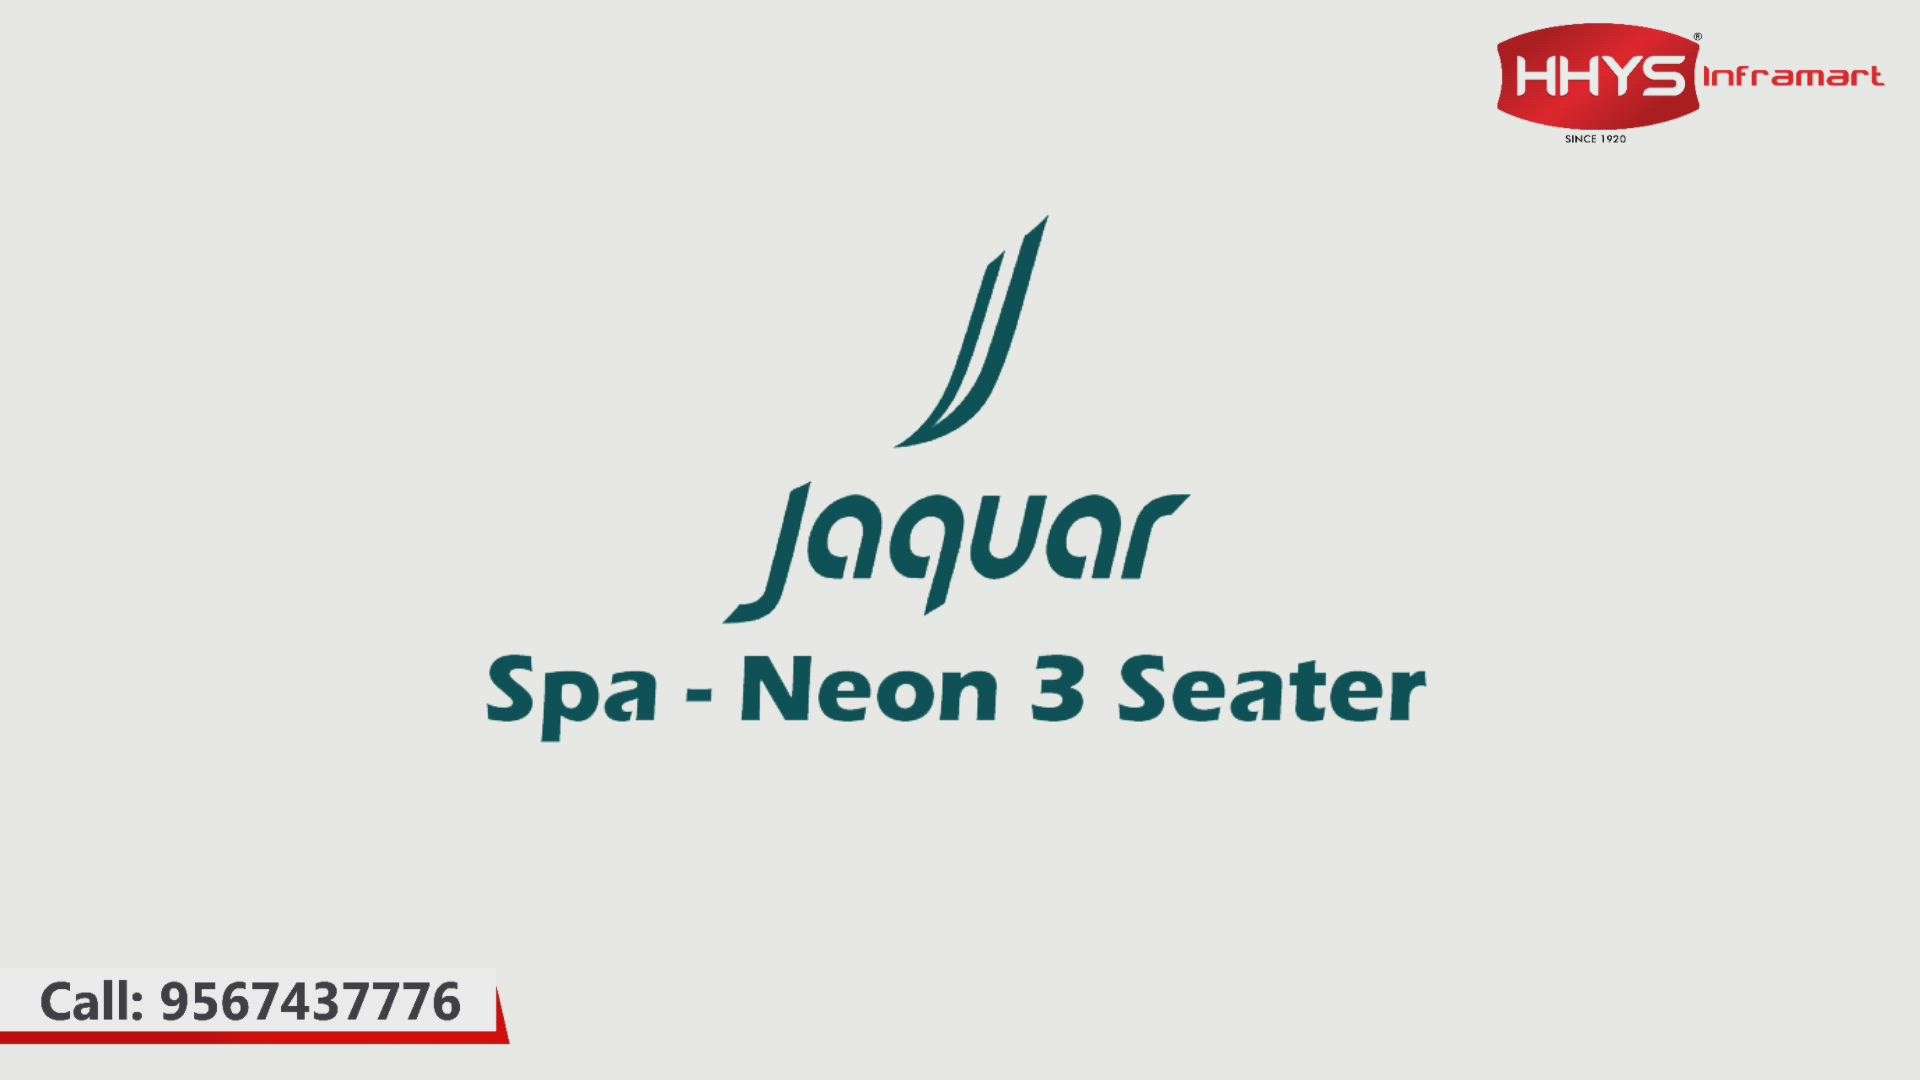 ✅ Jaquar Spa Neon ( 3 Seater )

We are offering Jaquar Neon Three Seater Spas with Stairs, panels, Thermic Cover to our valuable customers.

Features:

👉 Thermobond 4 Layer Shell Construction
👉 Perimeter Insulation
👉 Duraflex Plumbing
👉 Set & Forget Control System
👉 Multi- Color Spa Light
👉 UVs Terilising system
👉 Ozone Filtration
👉 Thermoclad Cabinet

Visit our HHYS Inframart showroom in Kayamkulam for more details.

𝖧𝖧𝖸𝖲 𝖨𝗇𝖿𝗋𝖺𝗆𝖺𝗋𝗍
𝖬𝗎𝗄𝗄𝖺𝗏𝖺𝗅𝖺 𝖩𝗇 , 𝖪𝖺𝗒𝖺𝗆𝗄𝗎𝗅𝖺𝗆
𝖠𝗅𝖾𝗉𝗉𝖾𝗒 - 690502

Call us for more Details :
+91 95674 37776.

✉️ info@hhys.in

🌐 https://hhys.in/

✔️ Whatsapp Now : https://wa.me/+919567437776

#hhys #hhysinframart #buildingmaterials